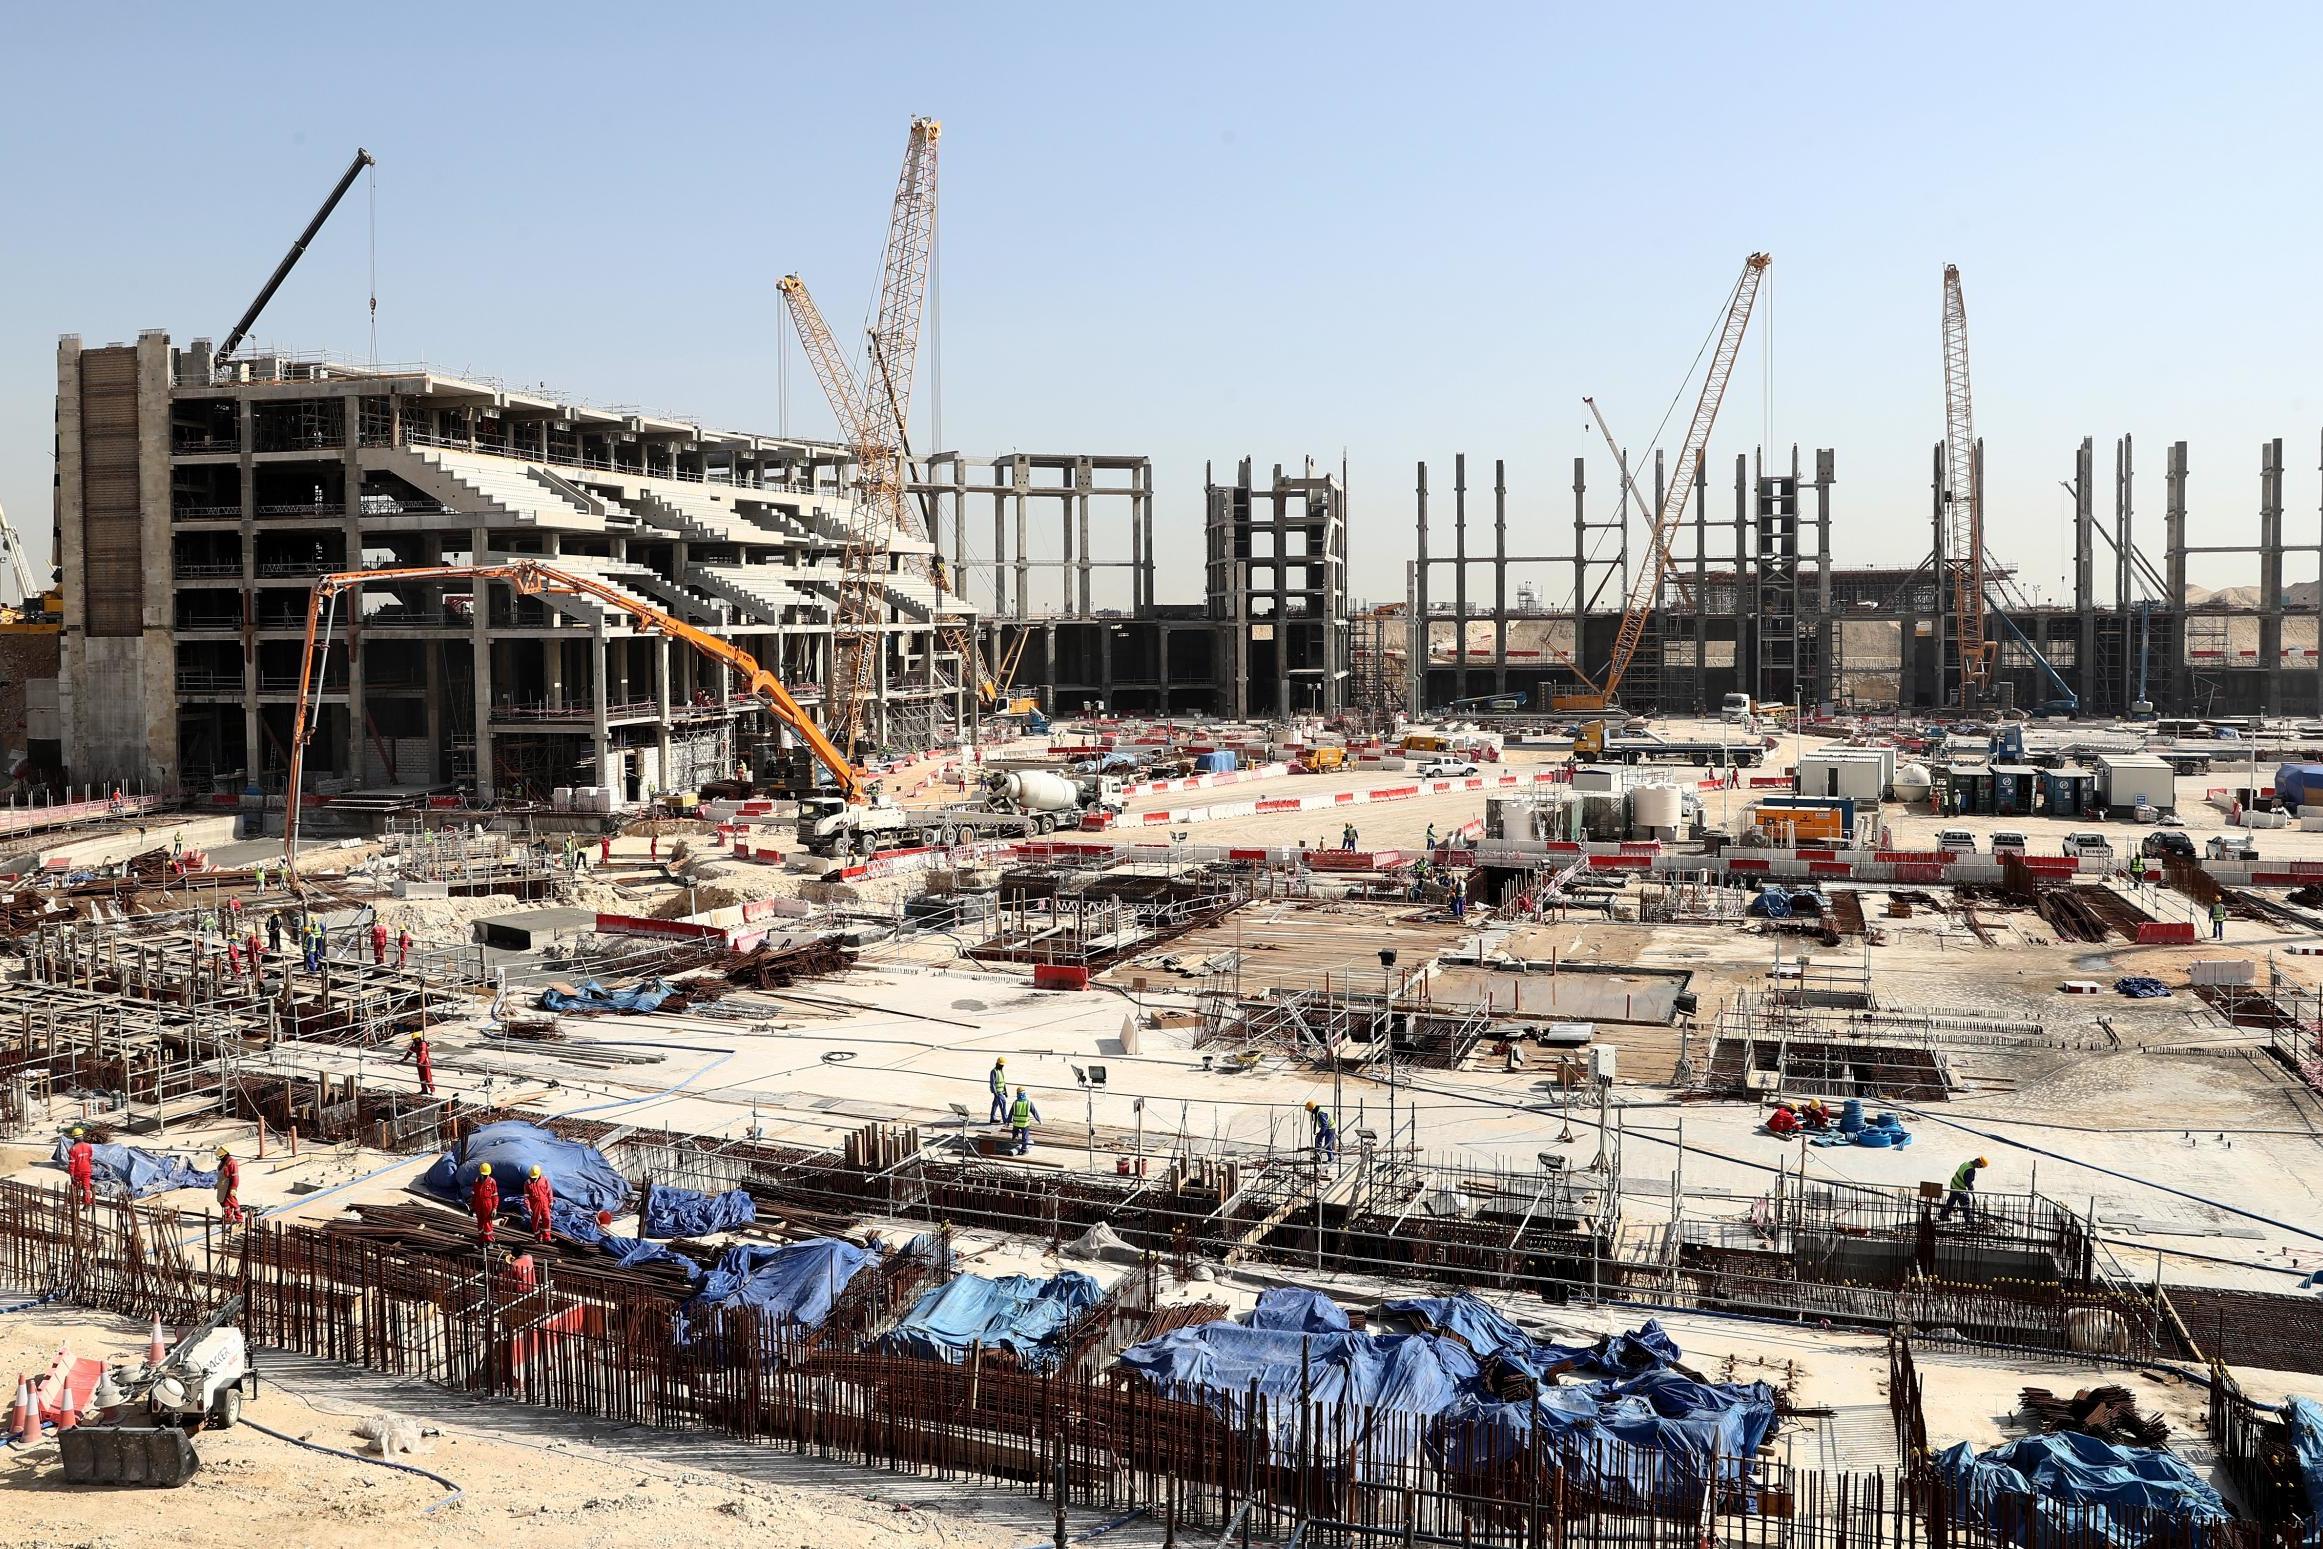 The construction site of Qatar’s Al Bayt Stadium, which is due to host the 2022 World Cup